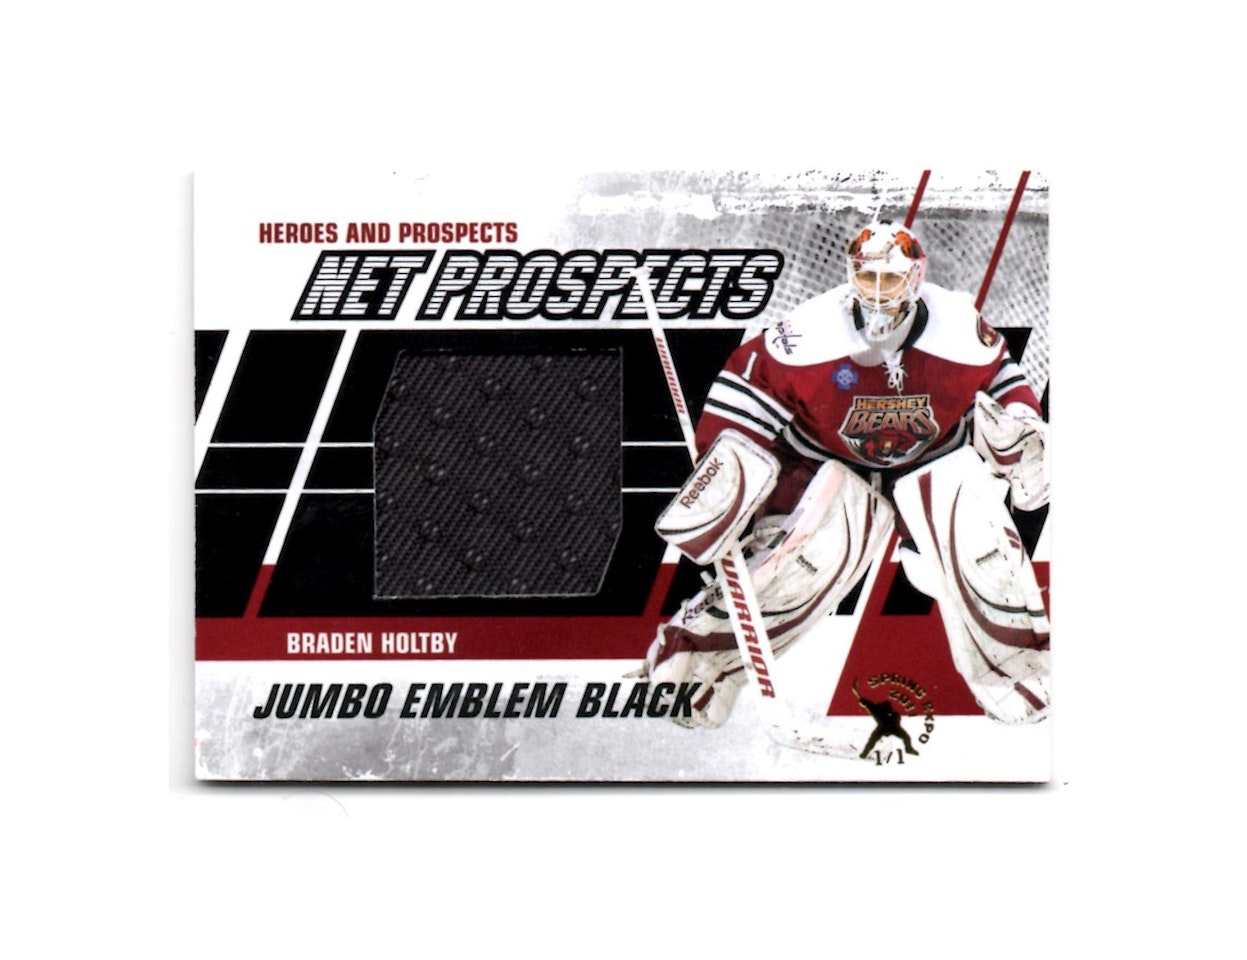 2010-11 ITG Heroes and Prospects Net Prospects Emblems Black Spring Expo #NPM08 Braden Holtby (250-X87-CAPITALS)